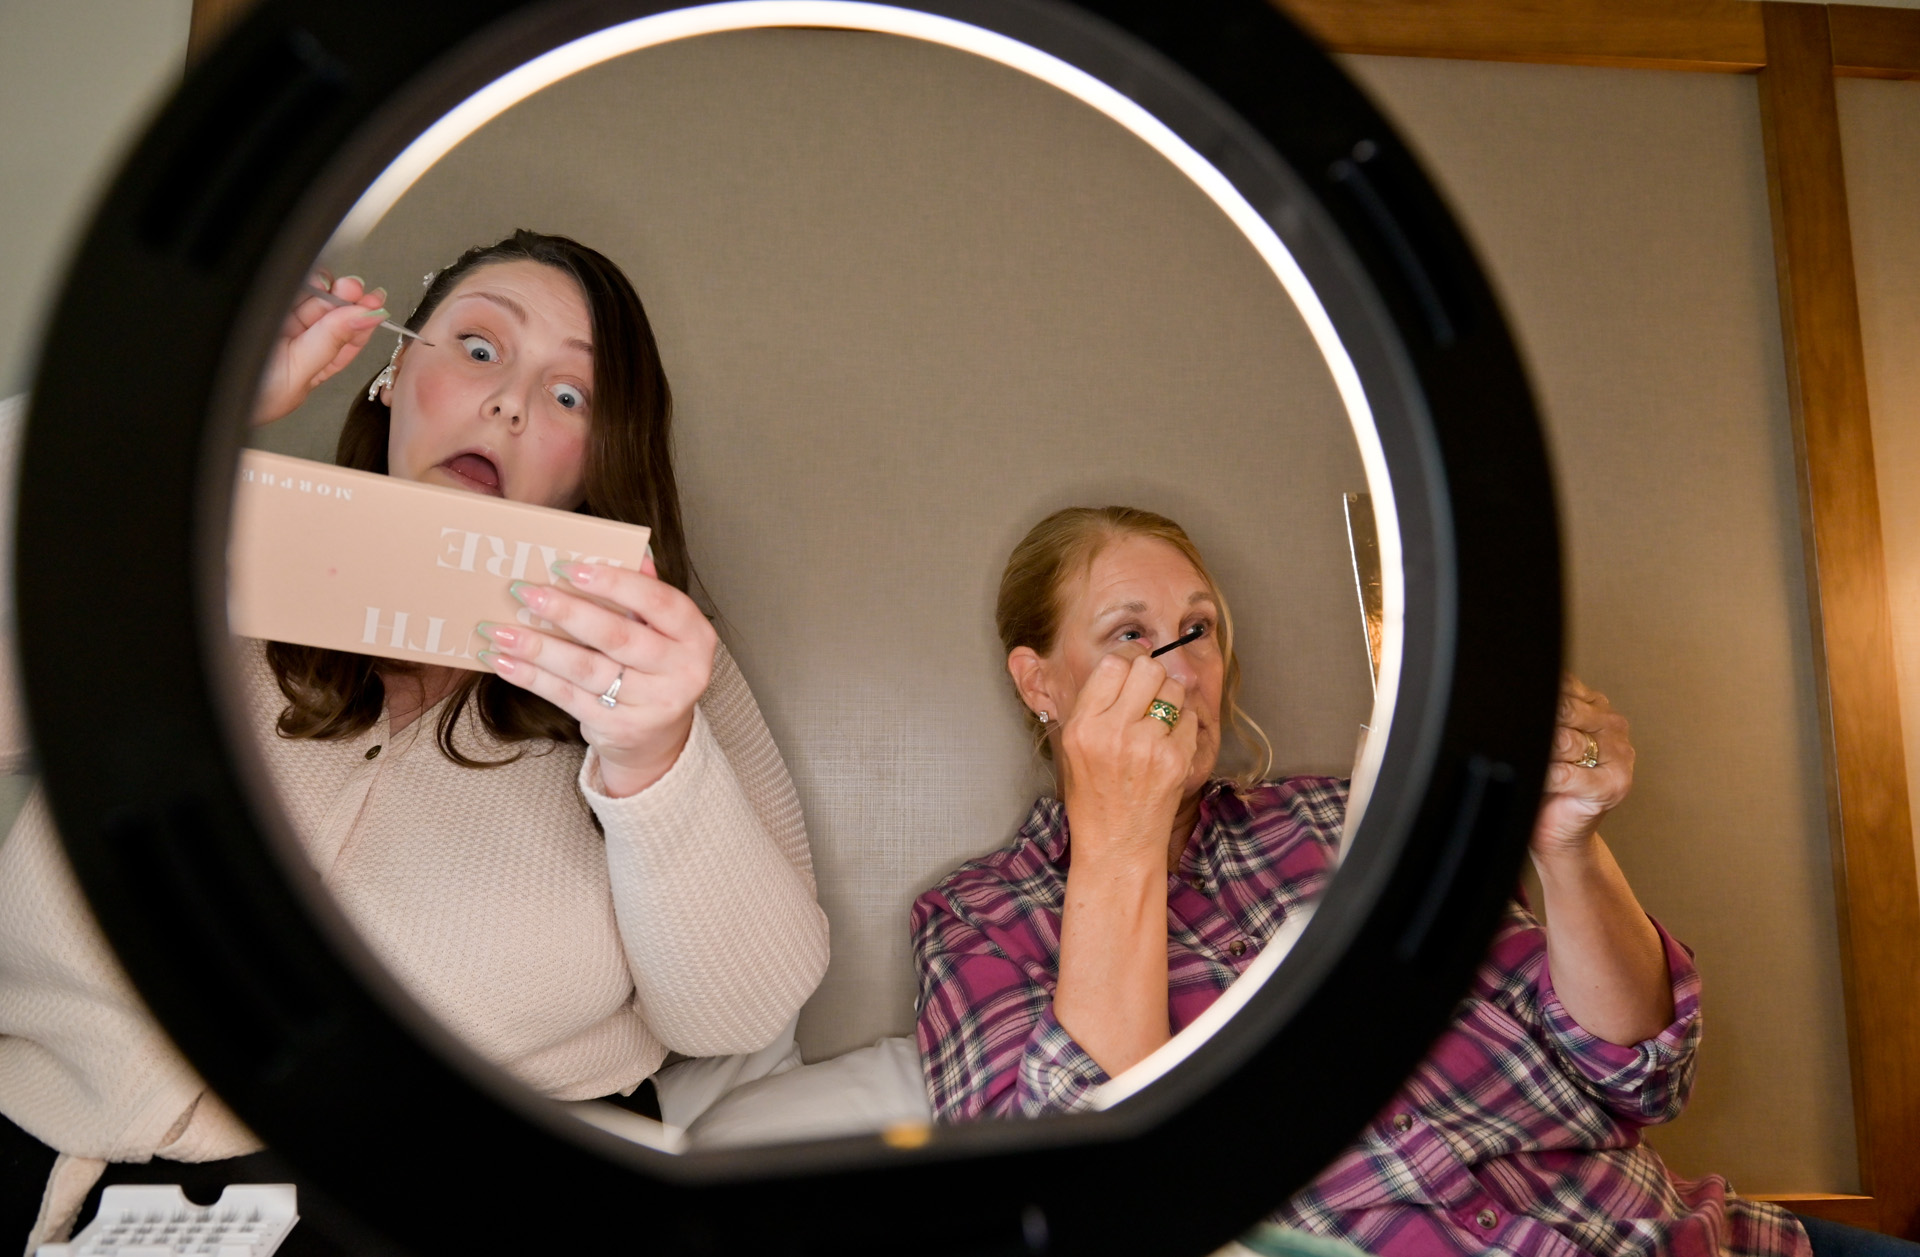 The bride and her mother get ready together applying their makeup  at the hotel before the bride's wedding in Grand Blanc, Michigan.